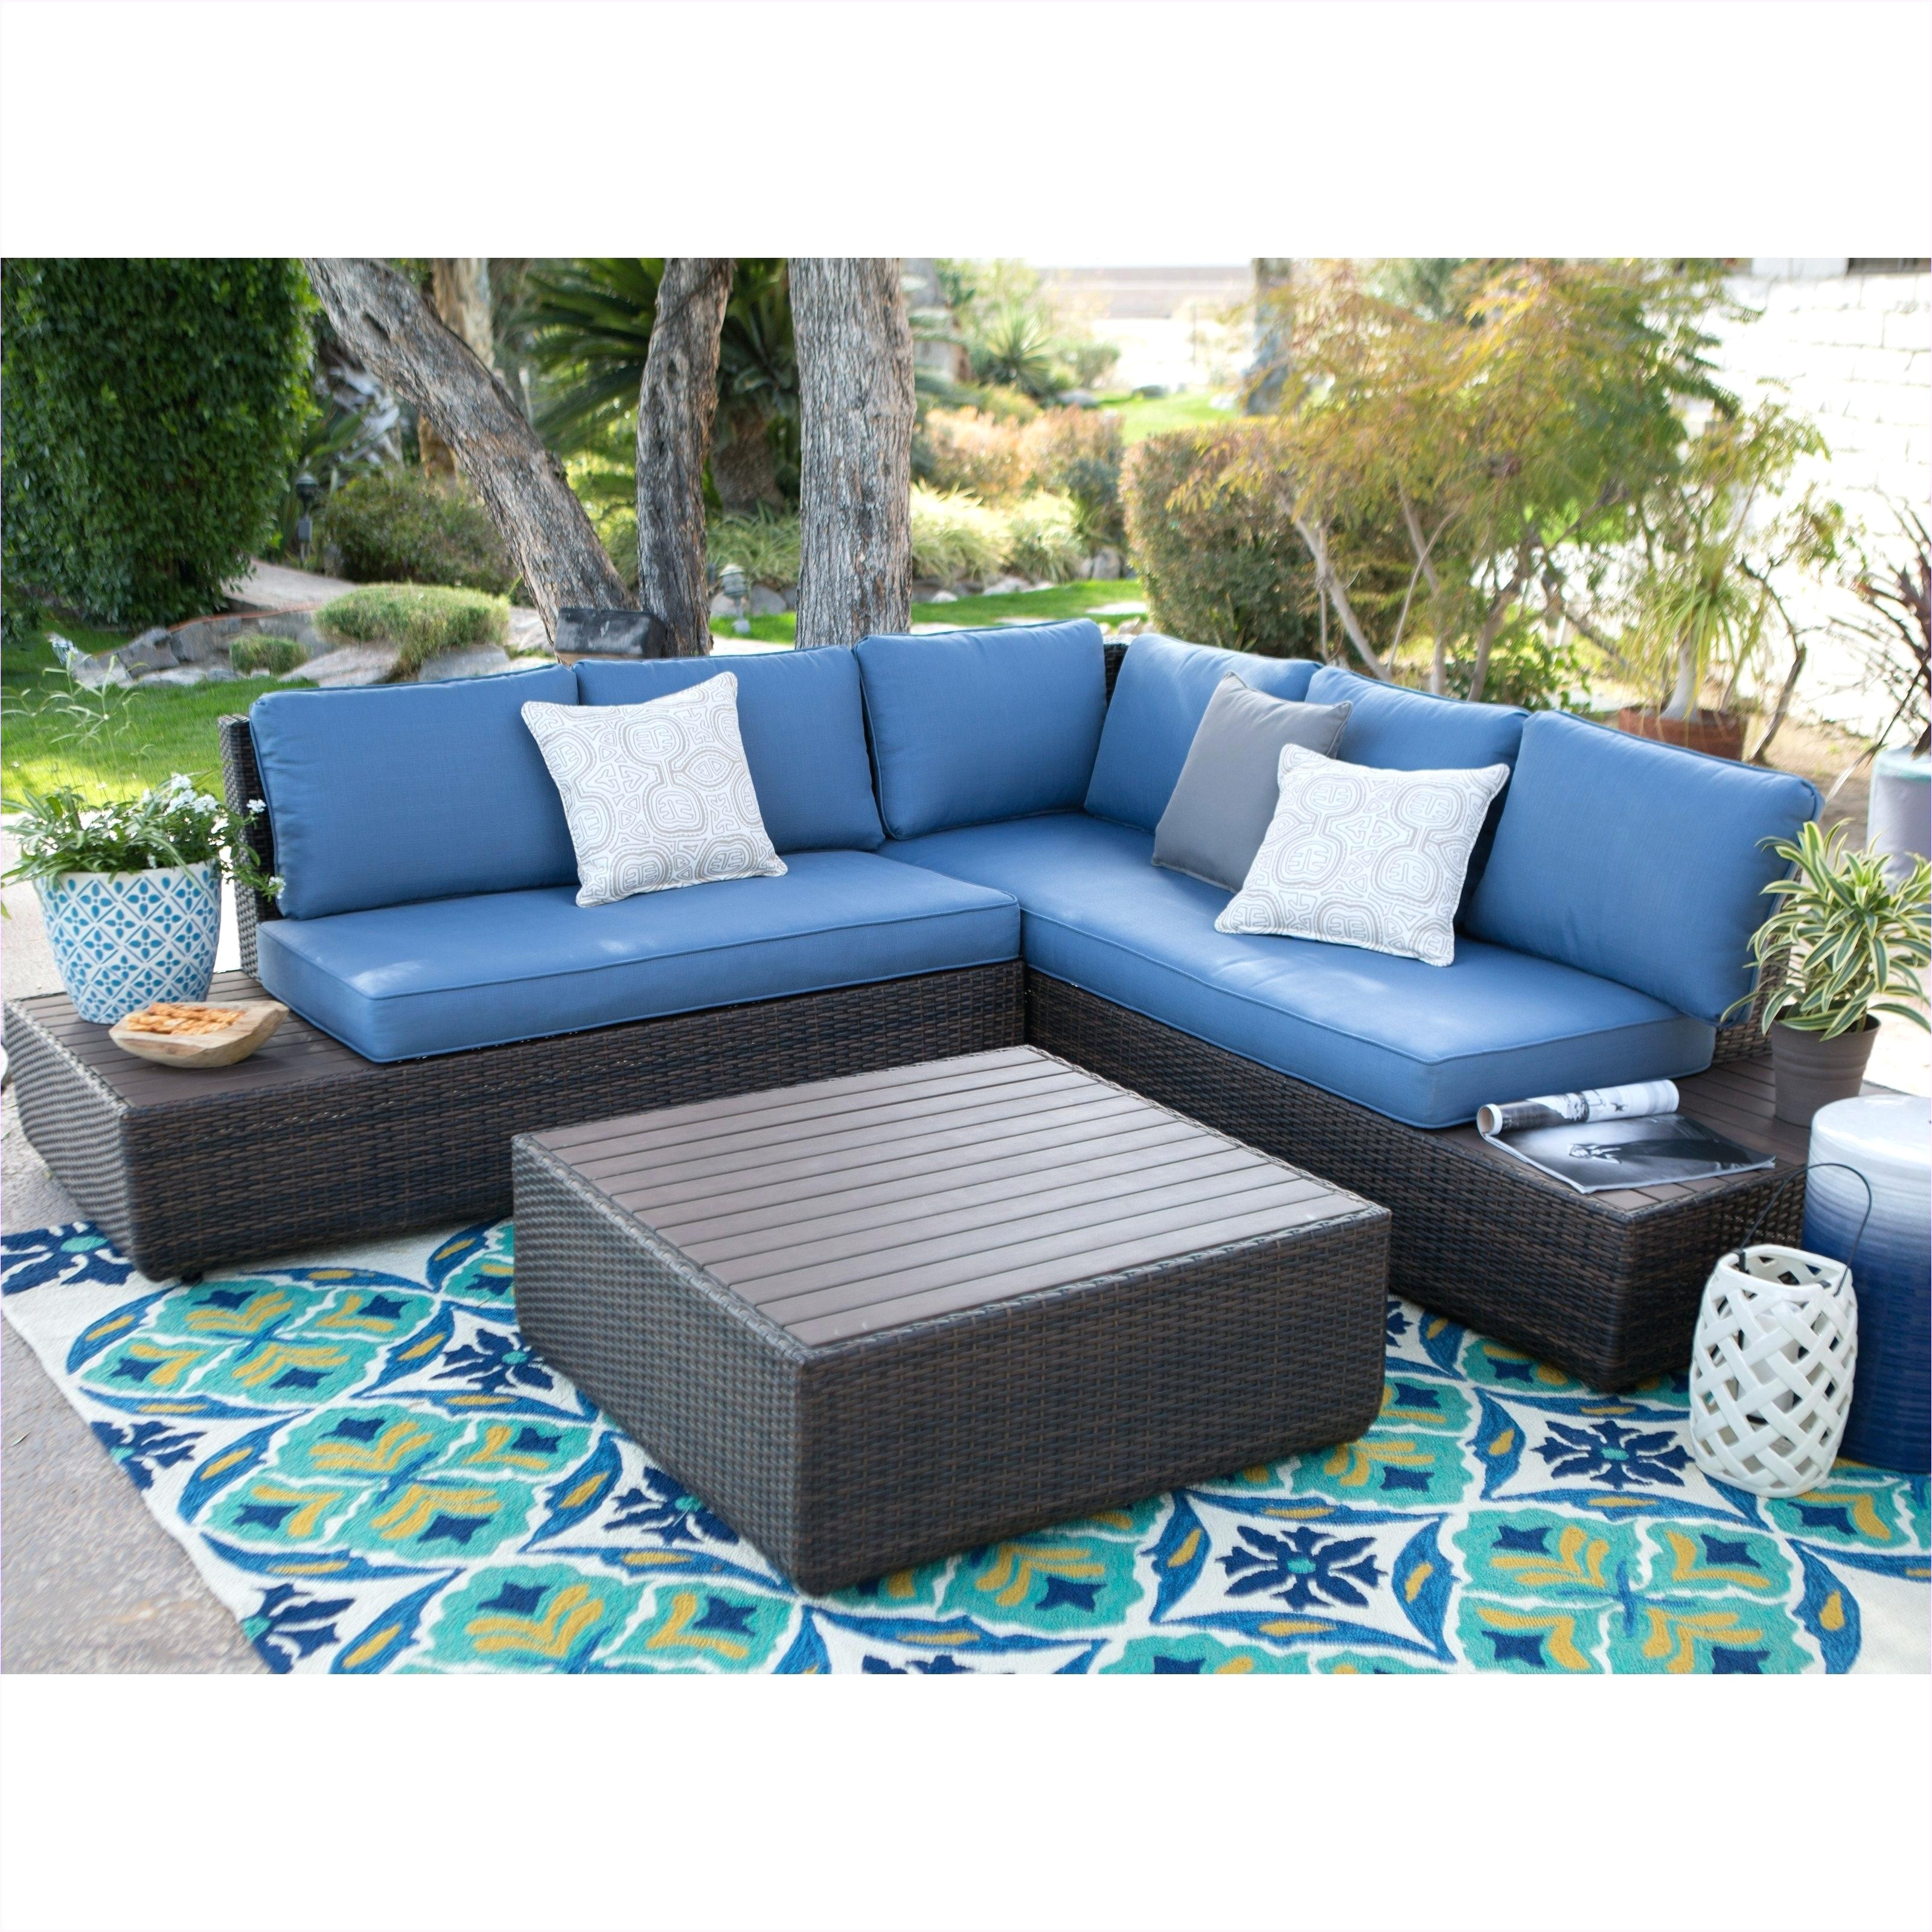 big lots furniture coffee tables download big lots patio furniture fresh furniture loveseat cushions awesome